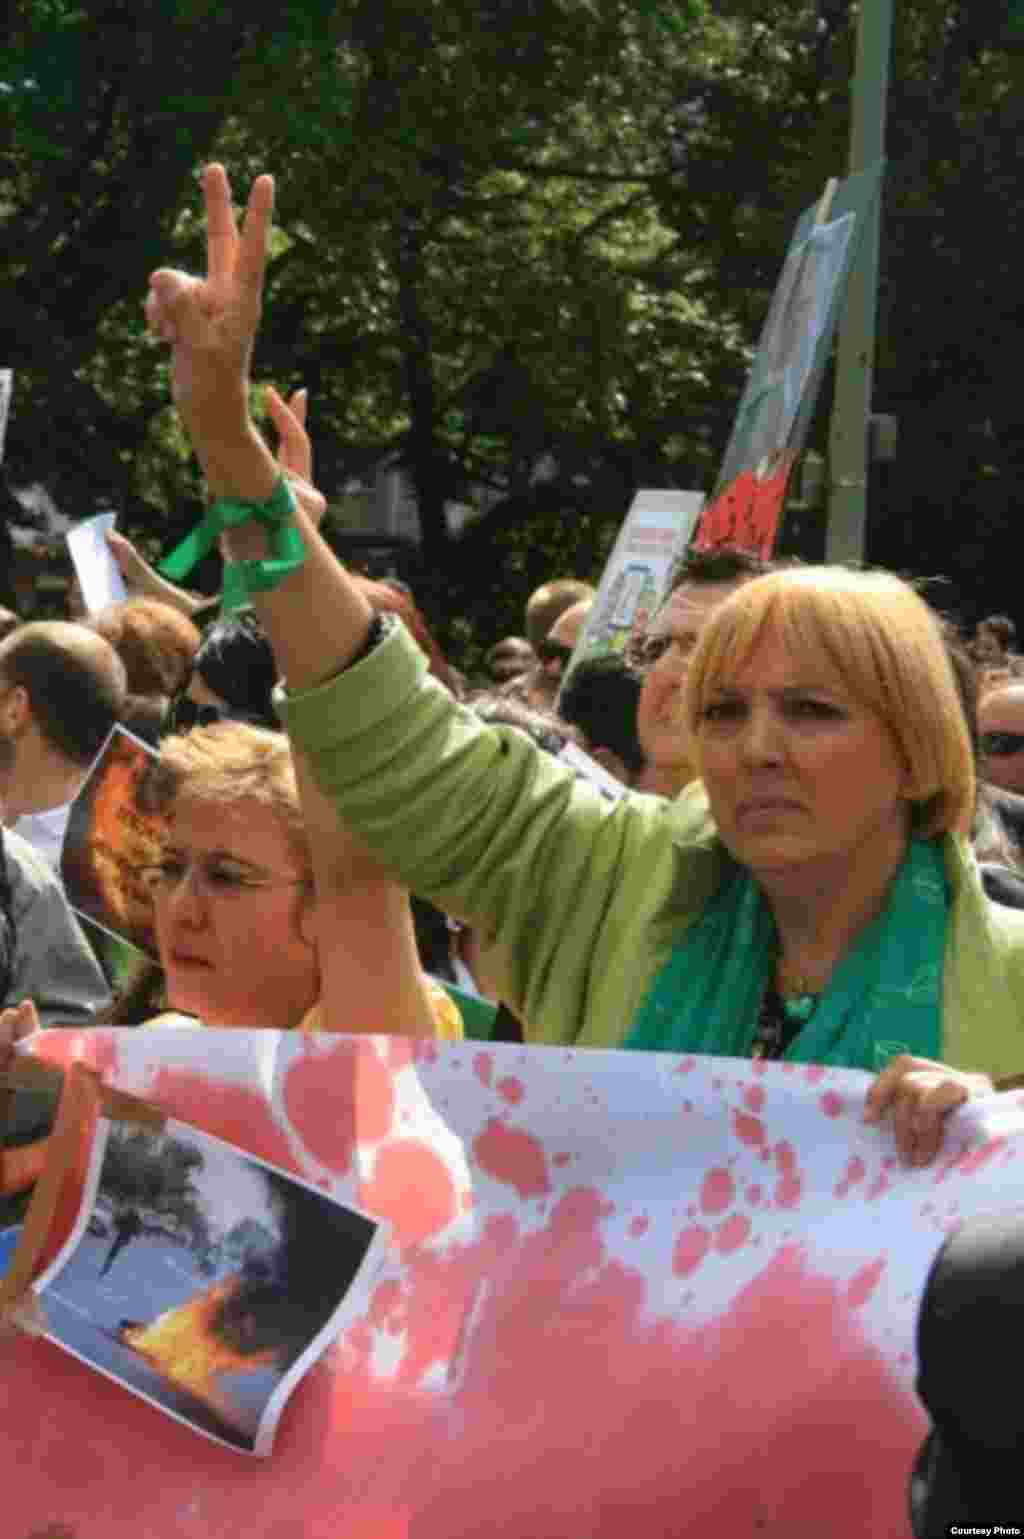 Claudia Roth, a leader of Germany's Green Party, attends one of the summer street protests organized by the Network.